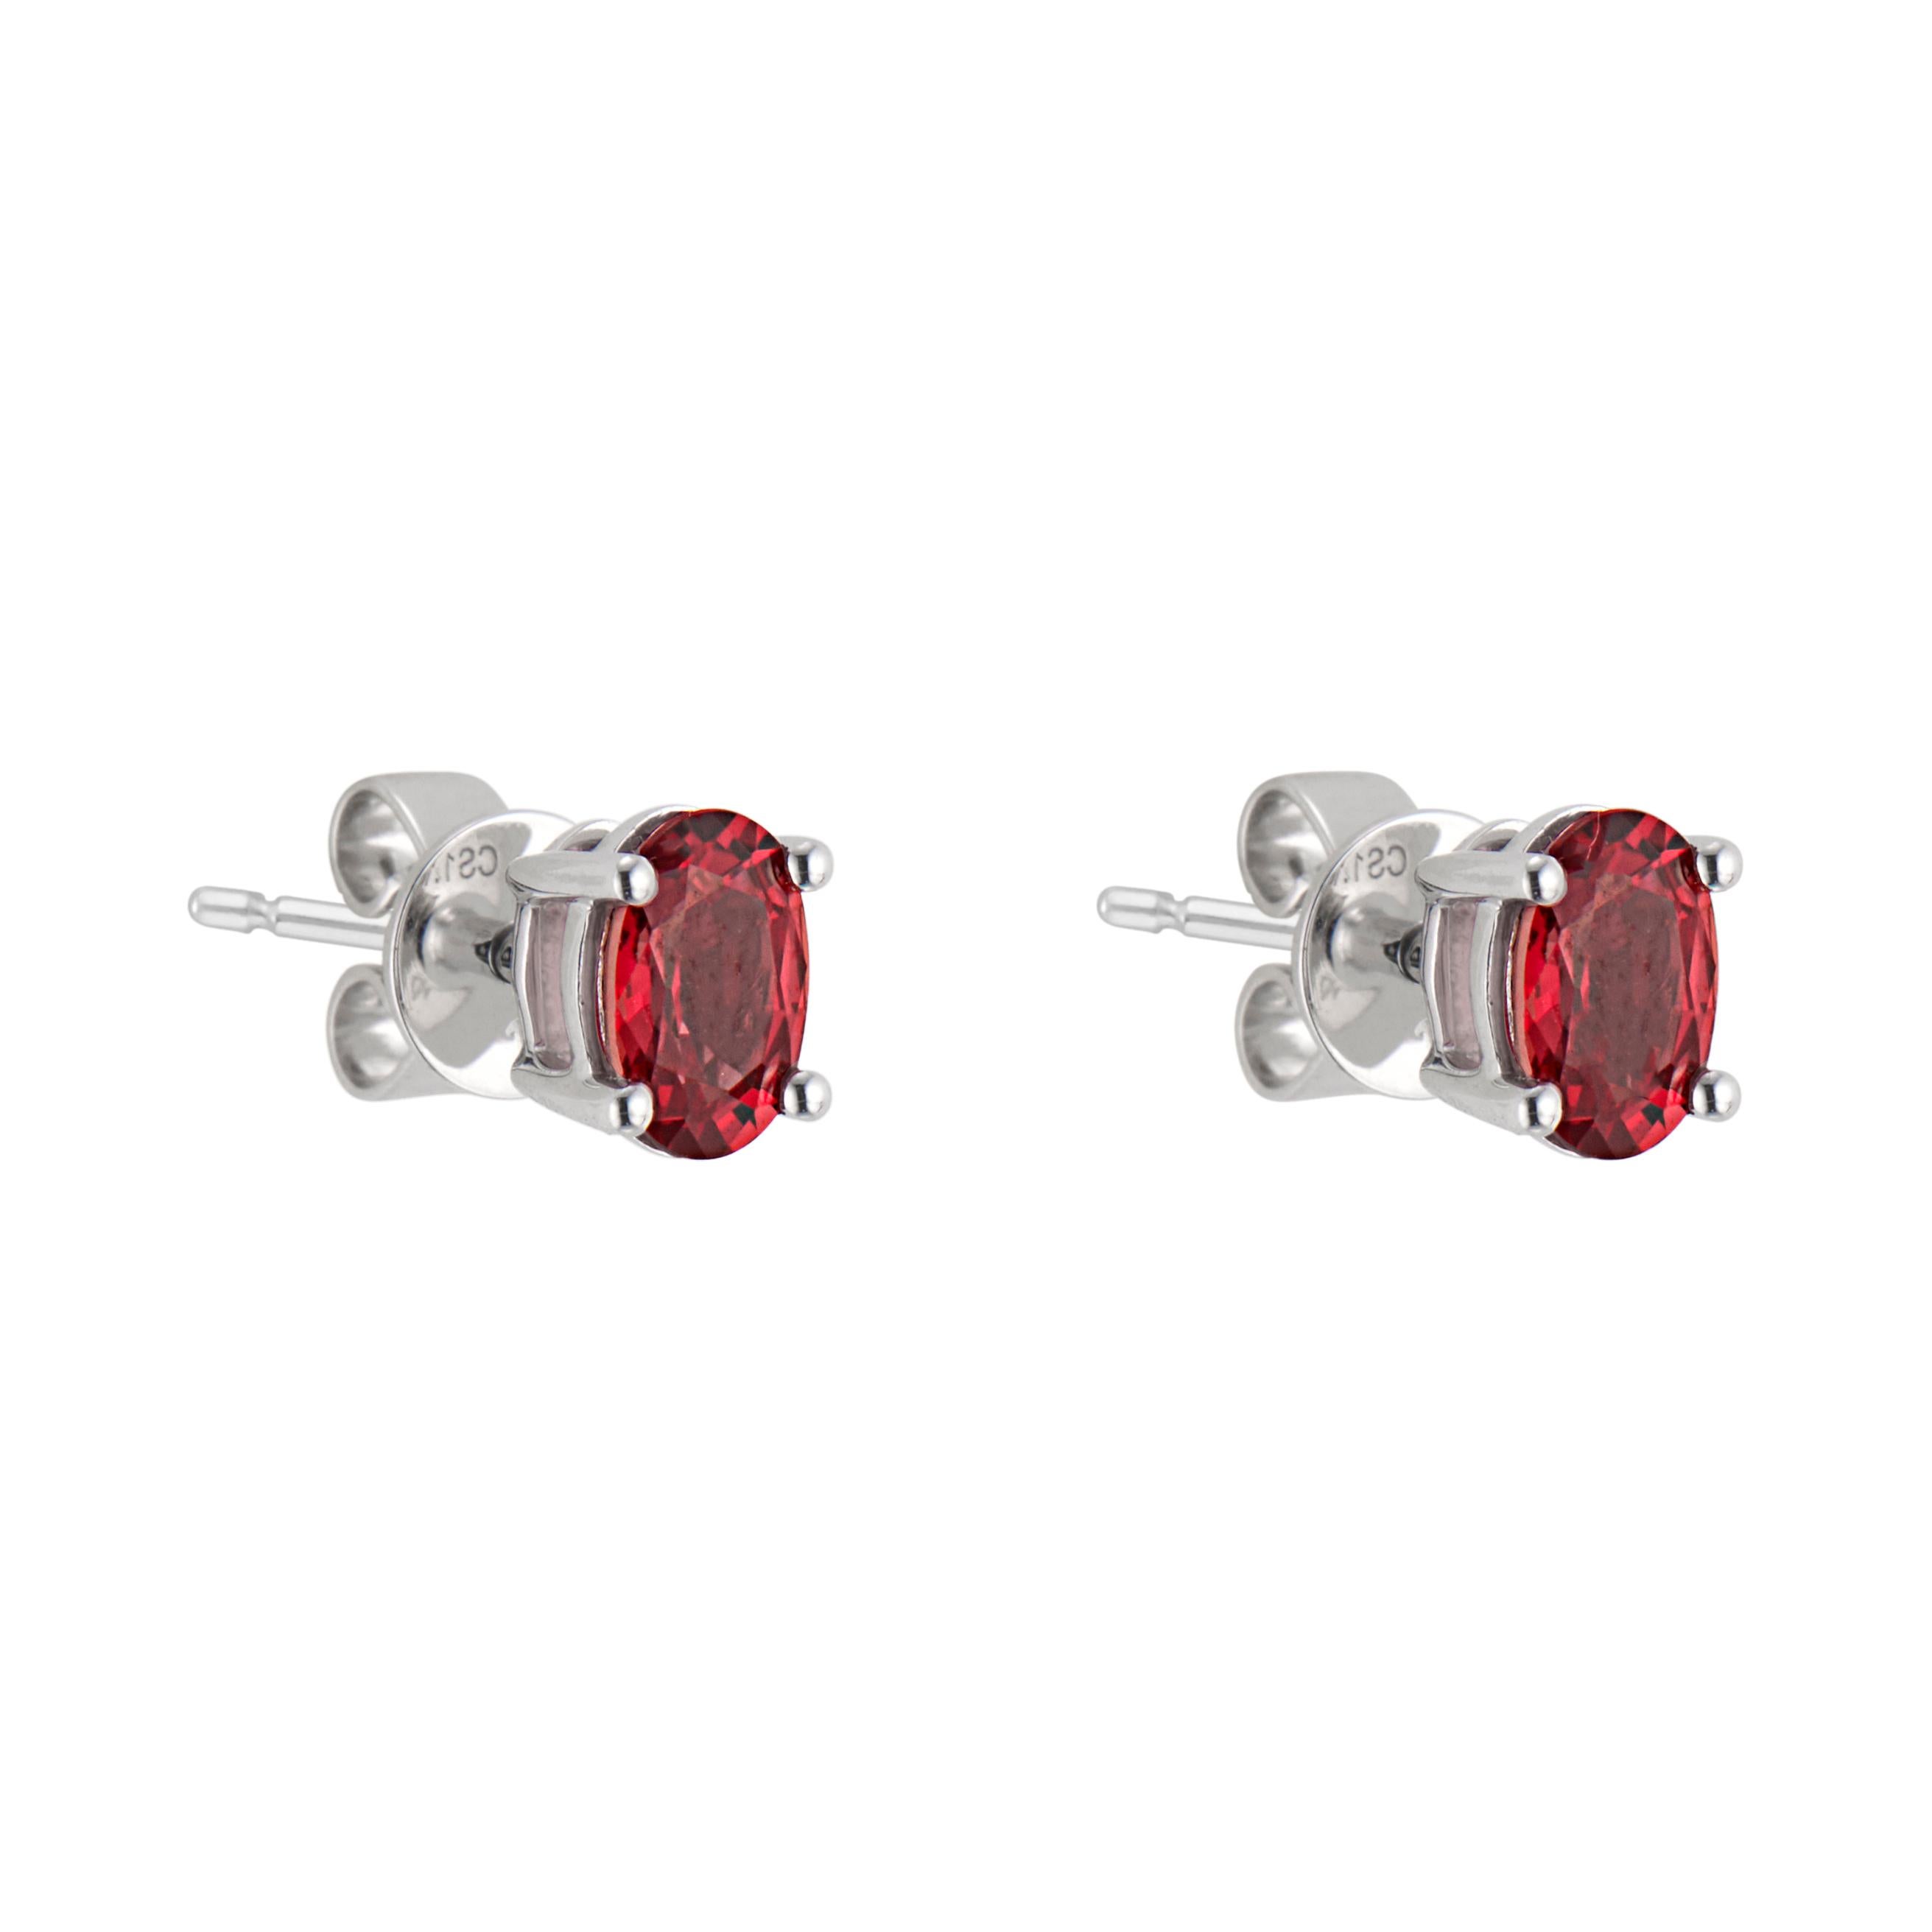 2 oval red with a bit of orange sapphires, set in 14k white gold 4 prong simple basket stud settings. 

2 oval red orange sapphires, approx. 1.14cts
14k white gold 
Stamped: 14k
1.5 grams
Top to bottom: 6mm or .25 Inches
Width: 4.5mm or .18